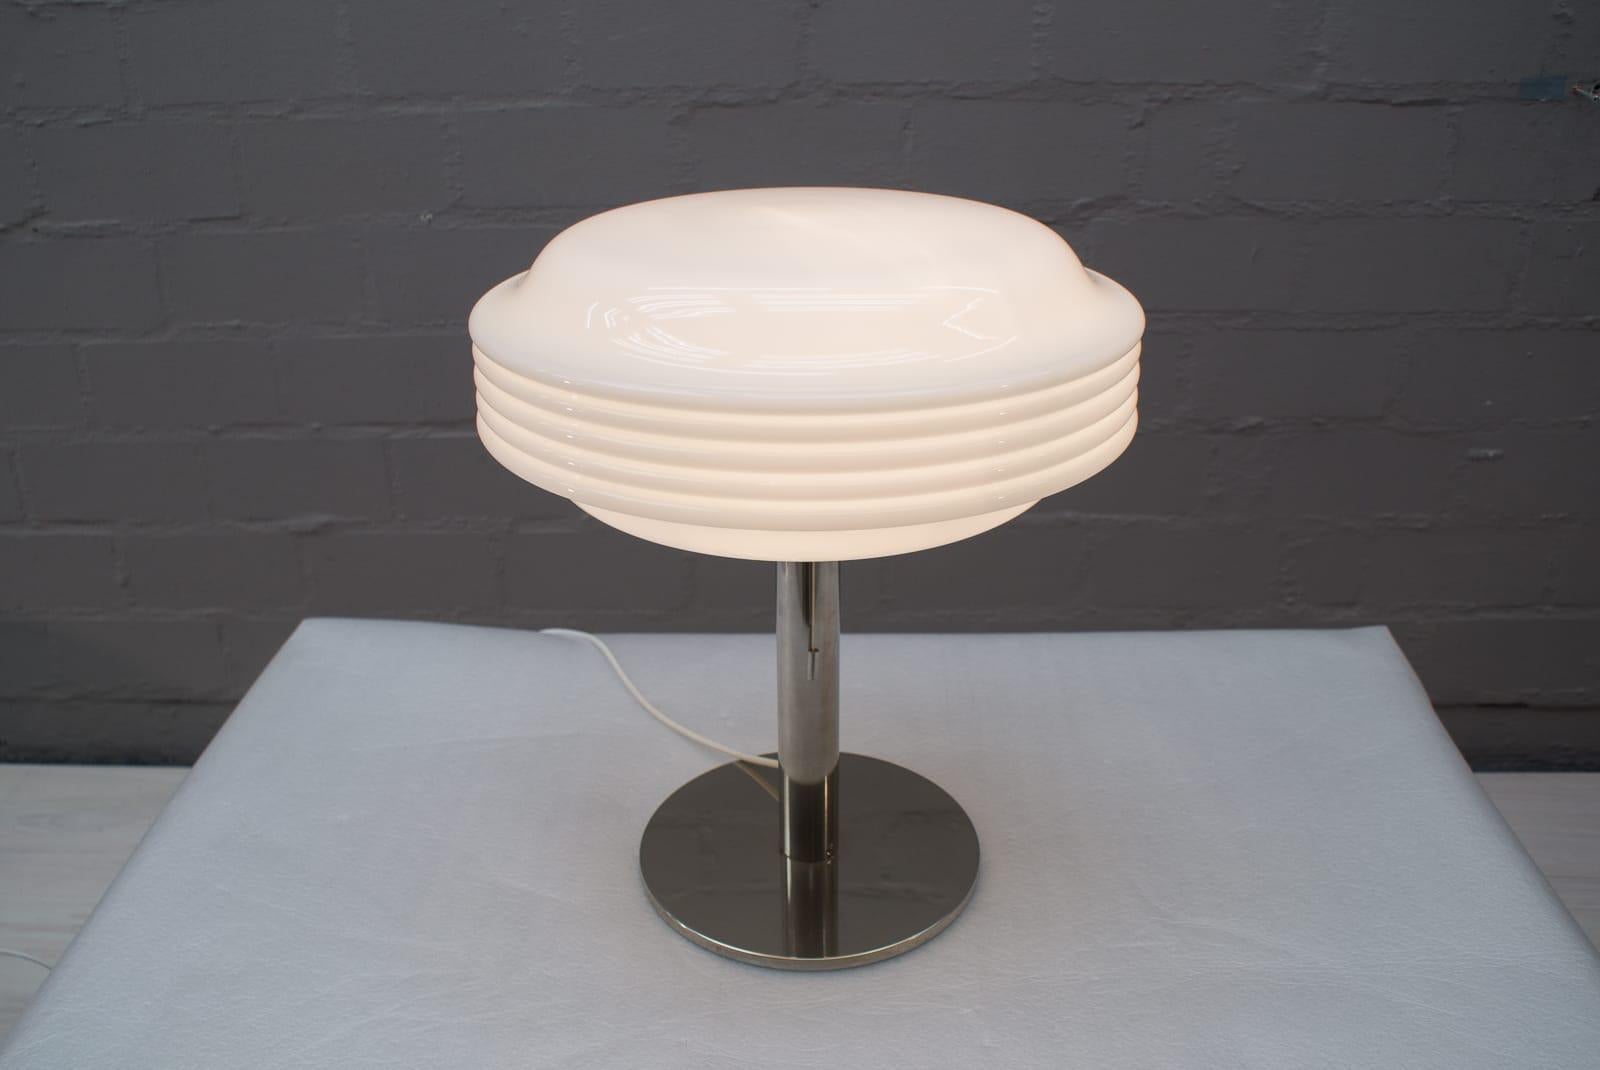 Opaline Glass Space Age Table Lamp by Temde Leuchten, Switzerland, 1970s For Sale